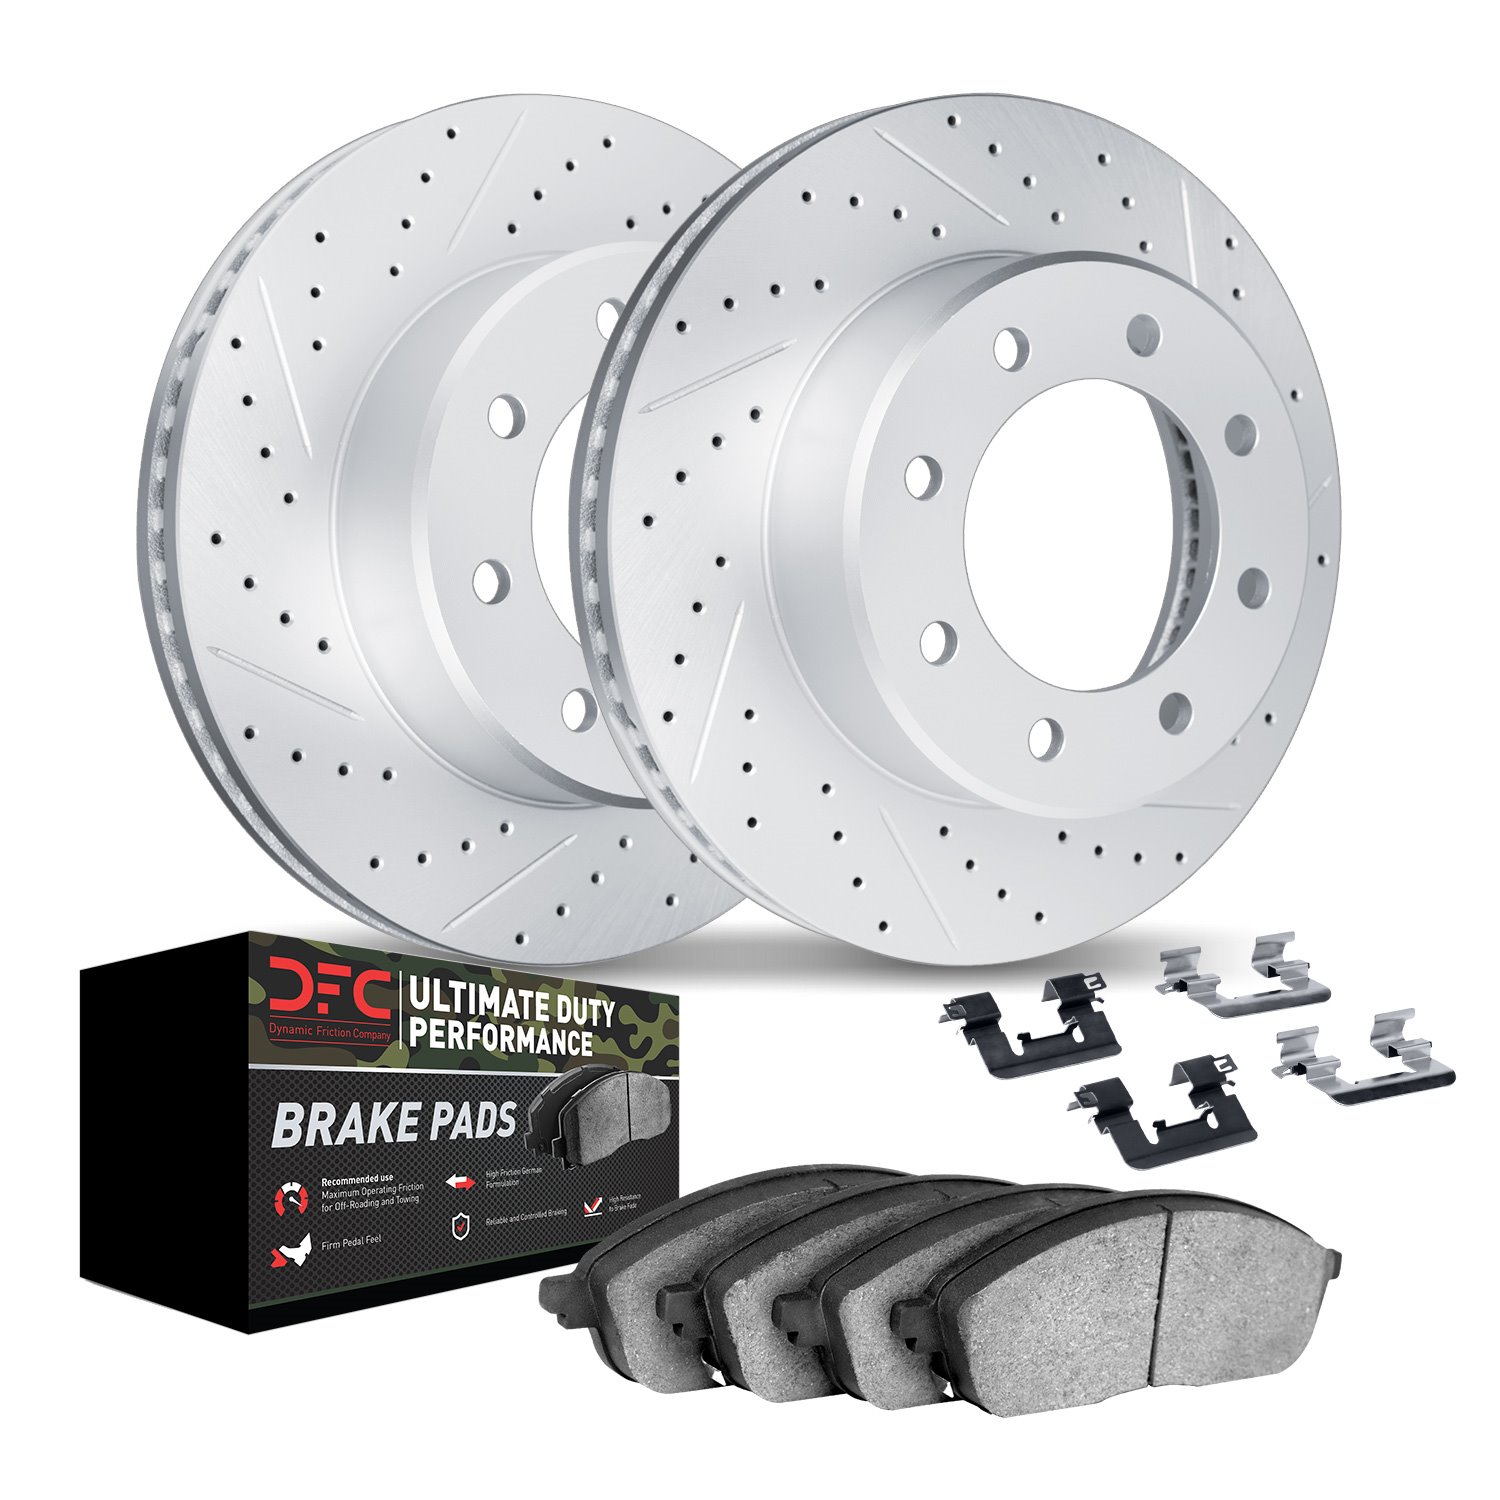 2412-54055 Geoperformance Drilled/Slotted Brake Rotors with Ultimate-Duty Brake Pads Kit & Hardware, 2010-2012 Ford/Lincoln/Merc